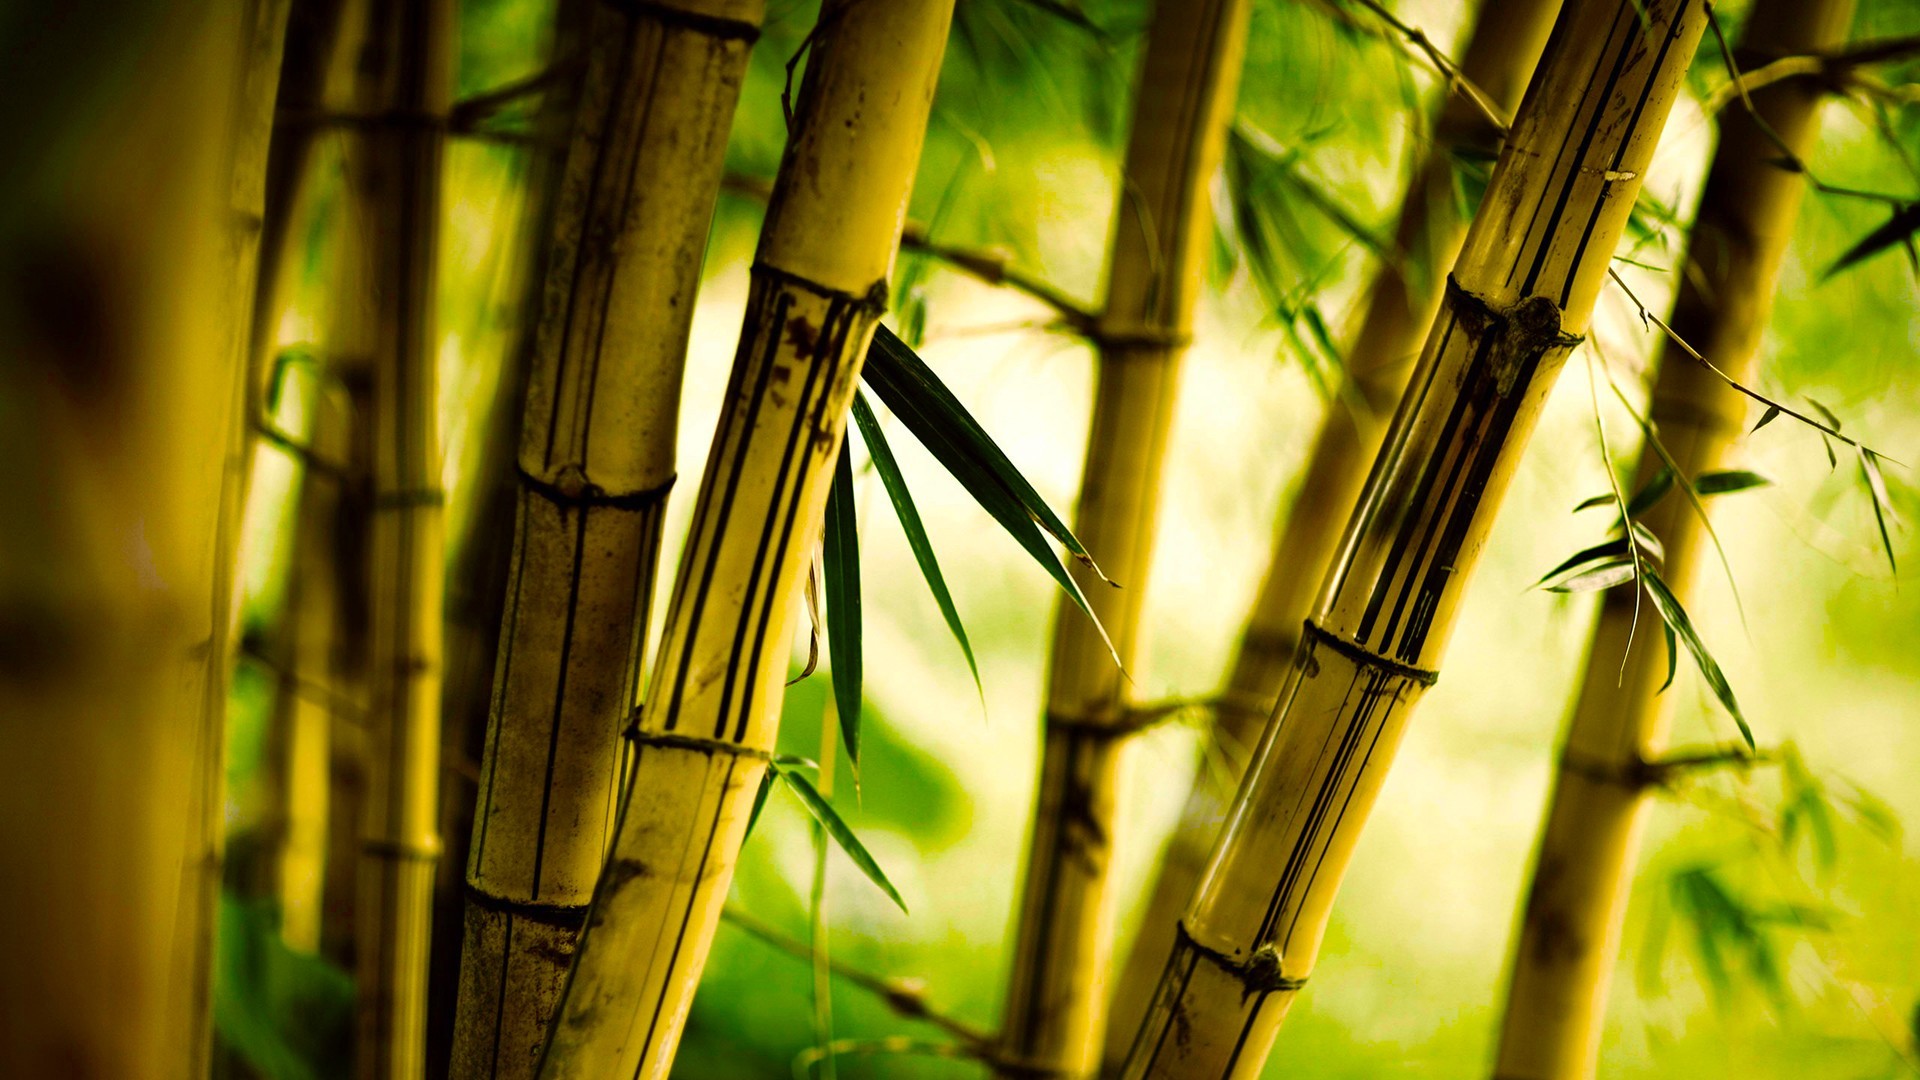 General 1920x1080 bamboo nature plants trees